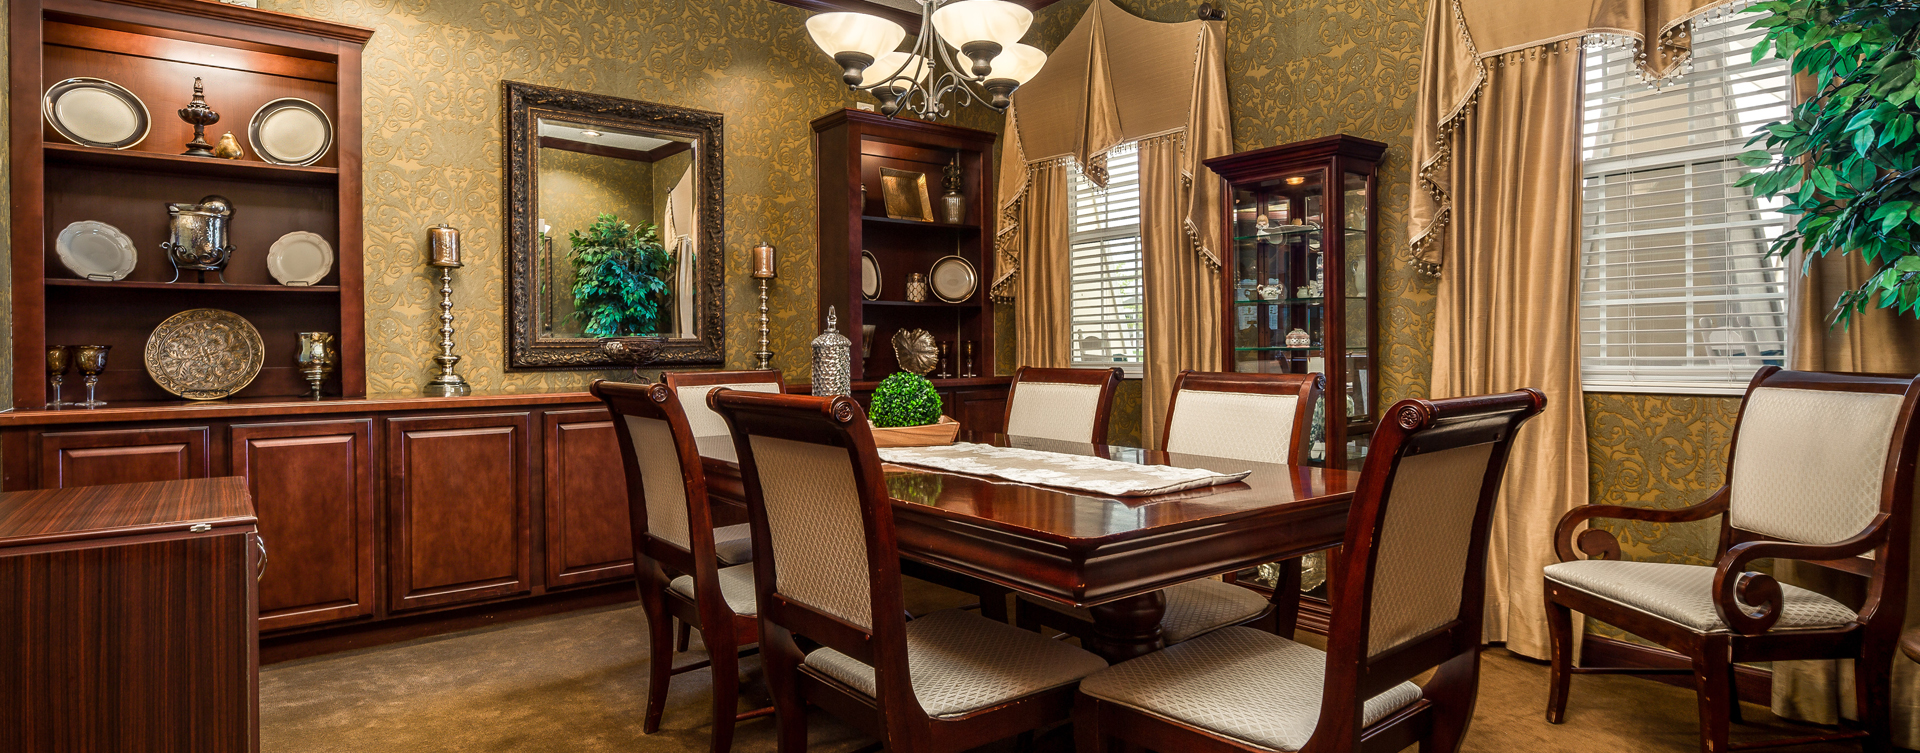 Food is best when shared with family and friends in the private dining room at Bickford of Okemos